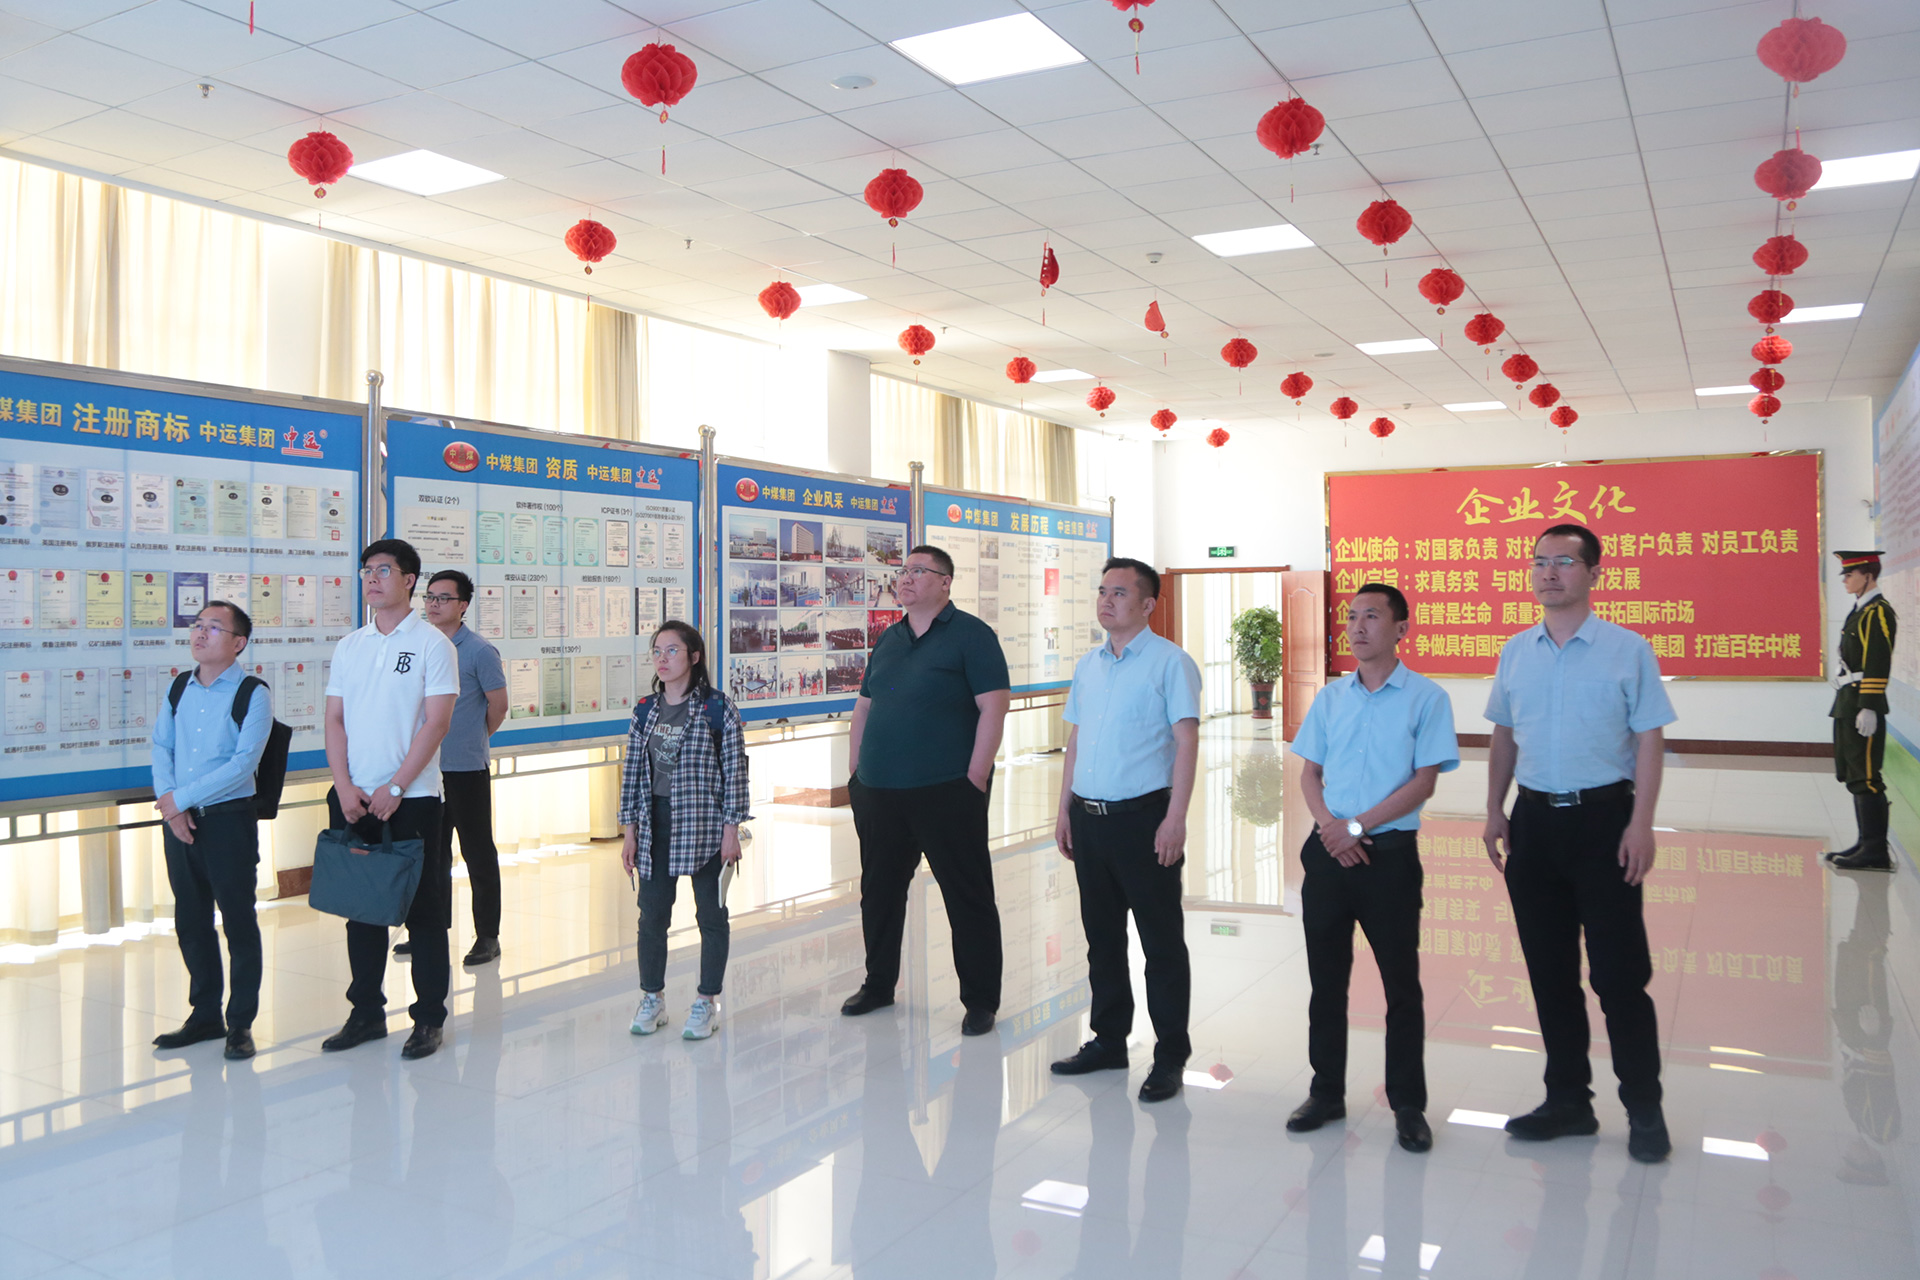 Warm Welcome China Software Testing Center Leadership Come Here China Coal Group Visit Guide